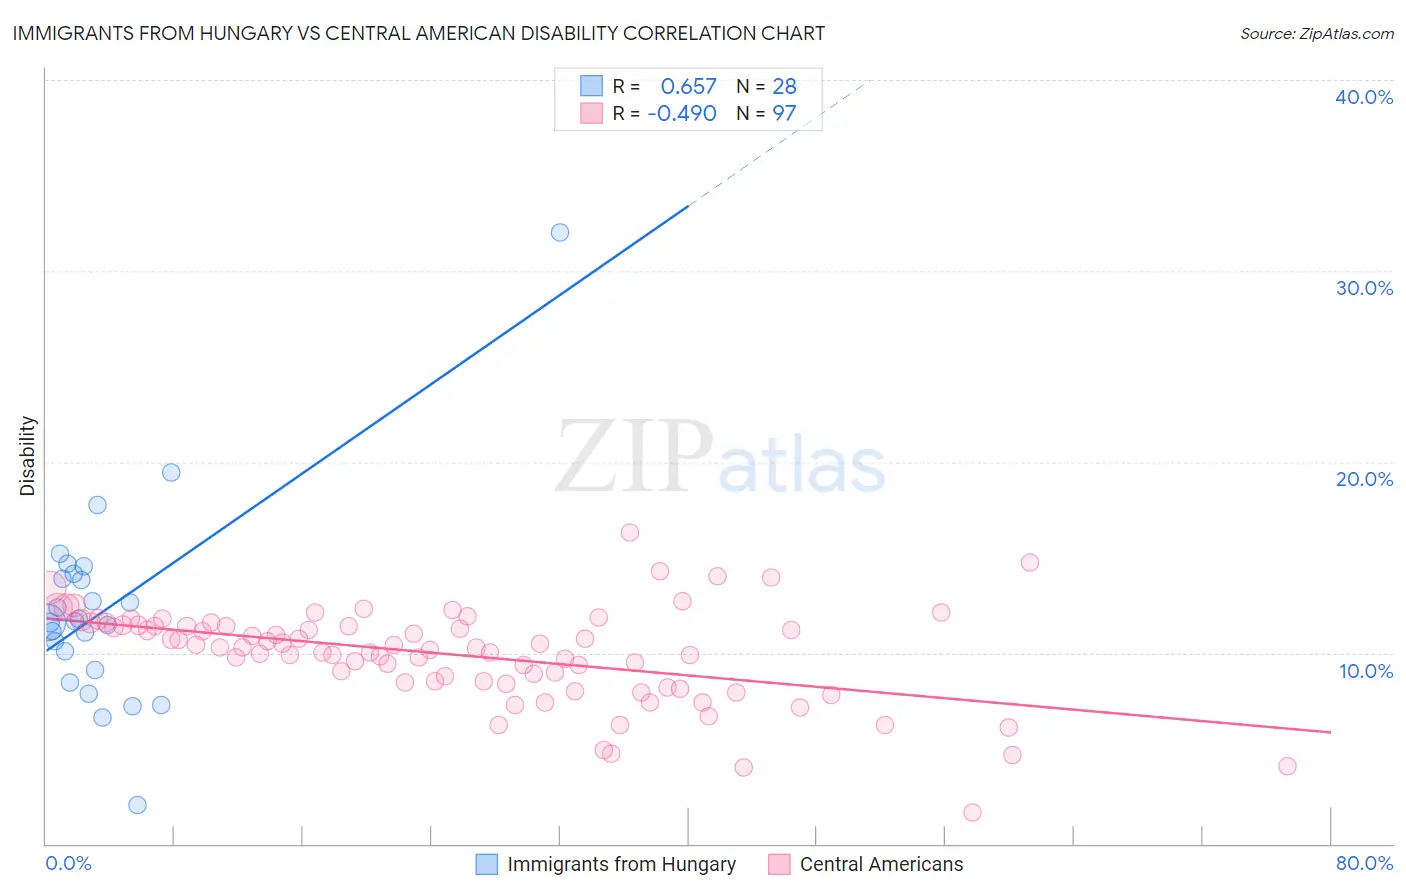 Immigrants from Hungary vs Central American Disability